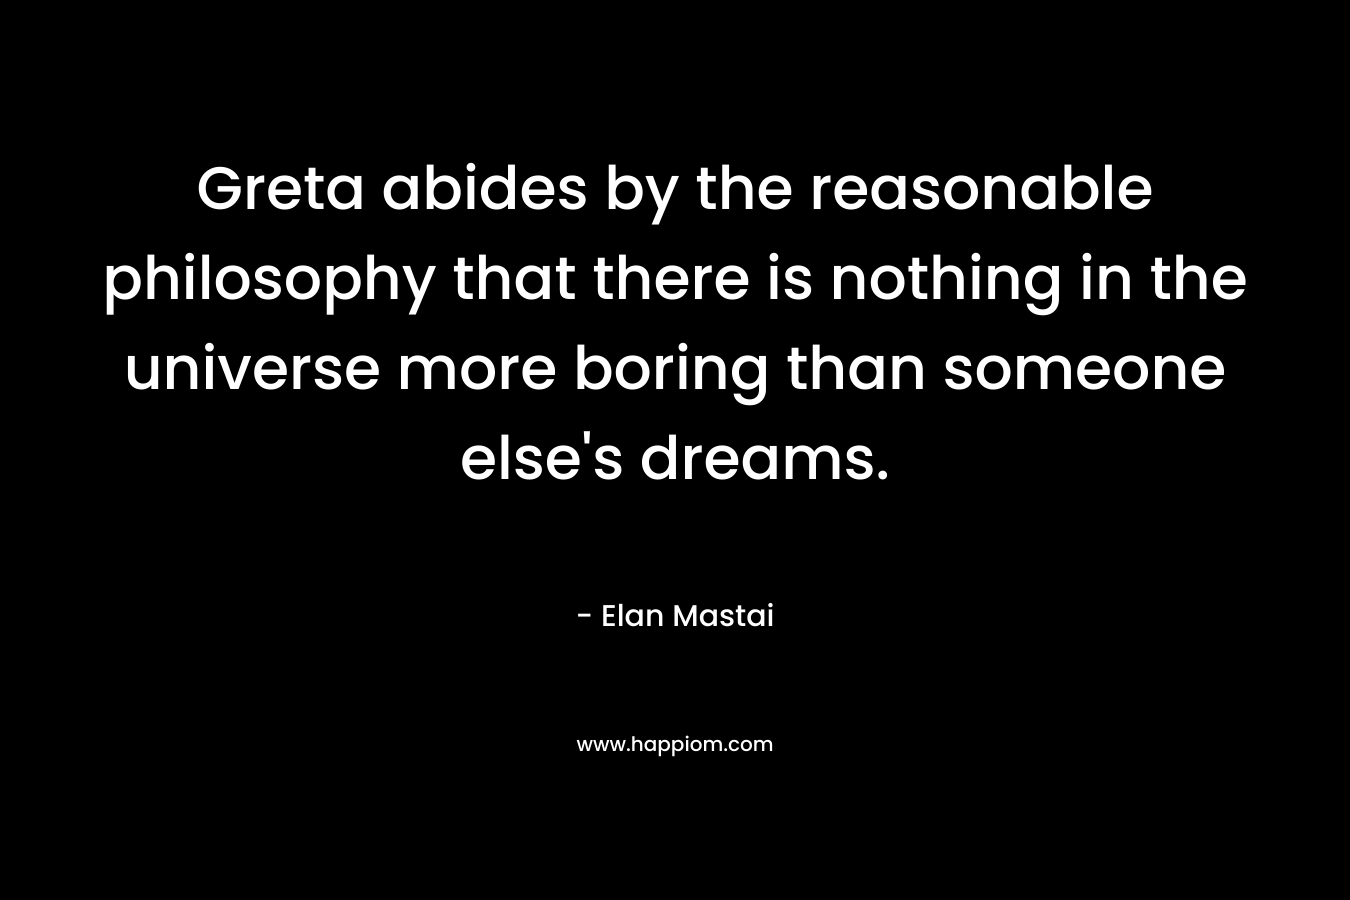 Greta abides by the reasonable philosophy that there is nothing in the universe more boring than someone else’s dreams. – Elan Mastai